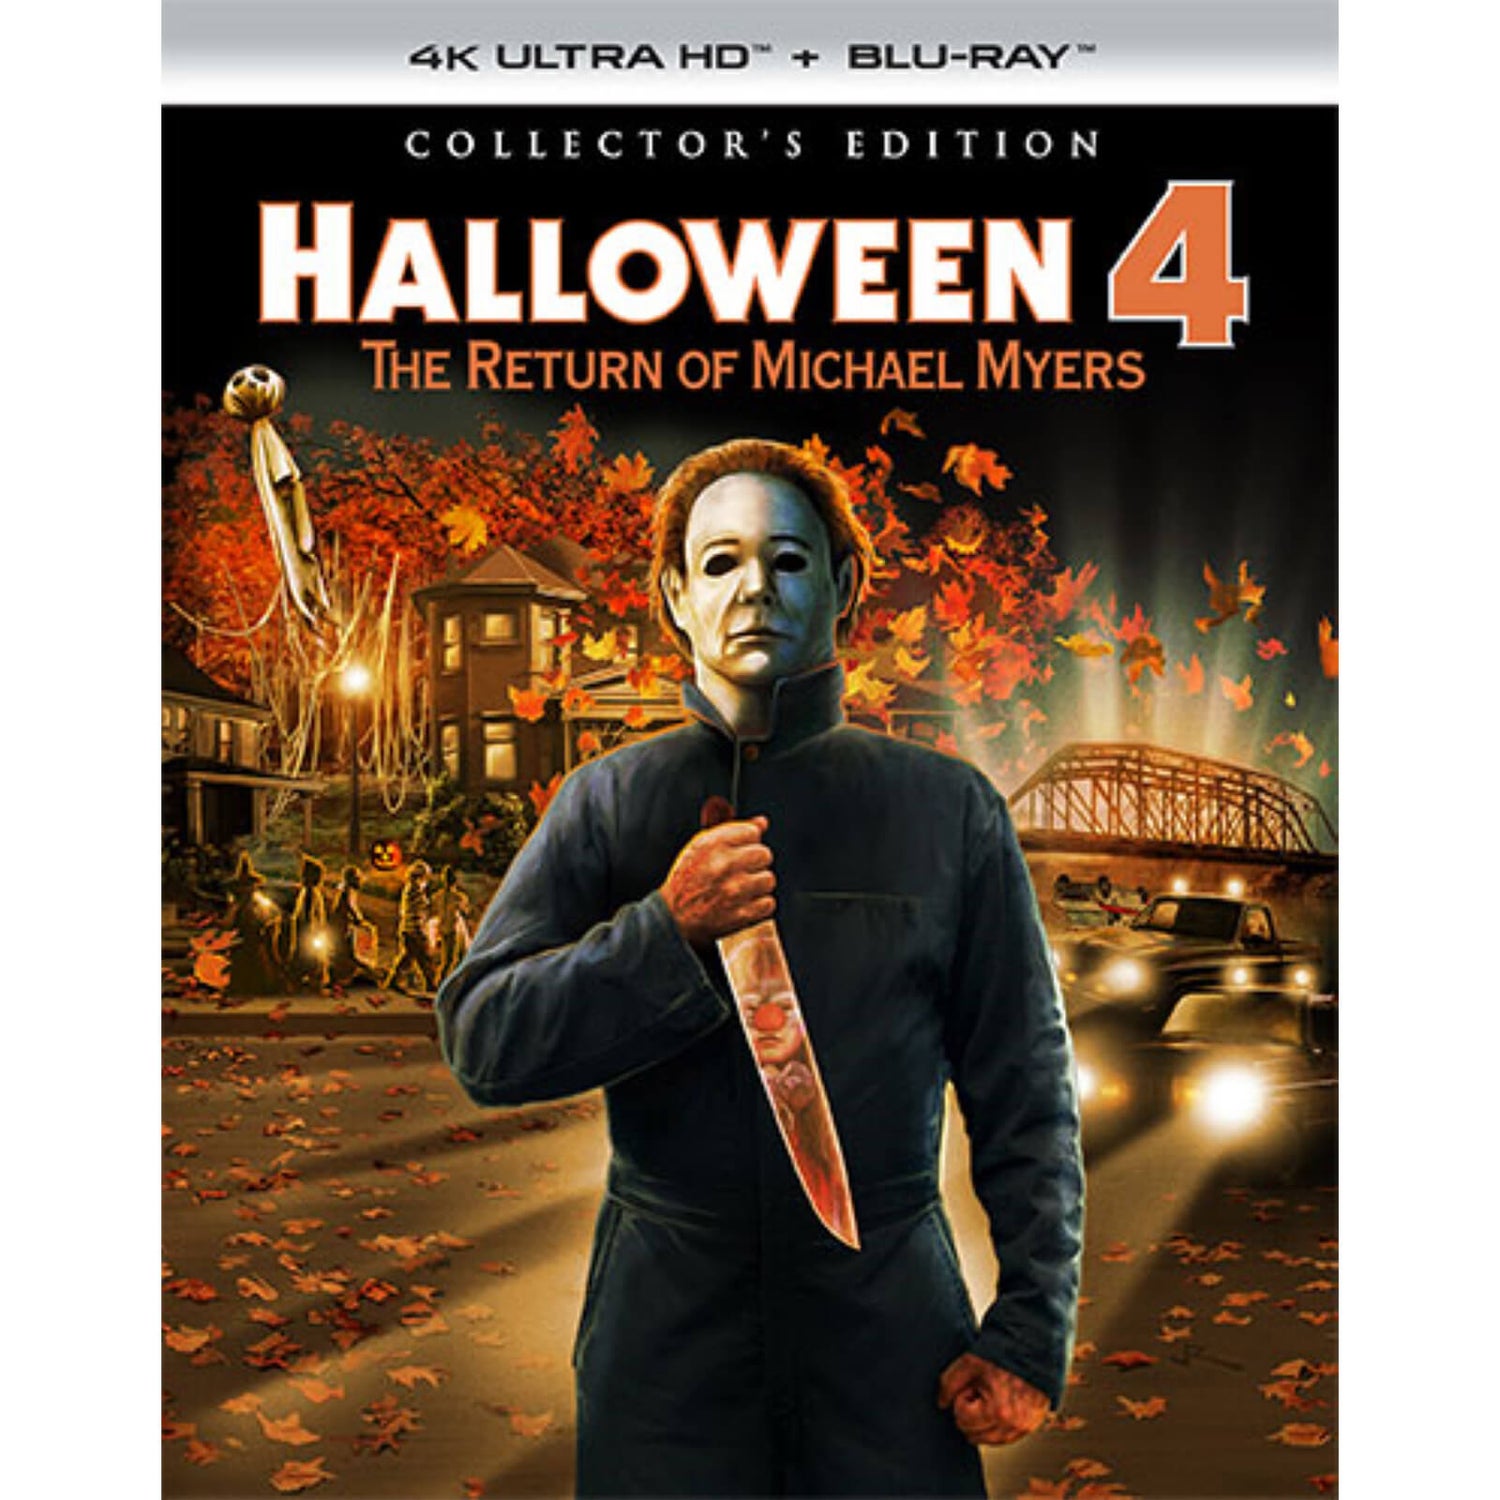 Halloween 4: The Return of Michael Myers - 4K Ultra HD Collector's Edition (Includes Blu-ray)